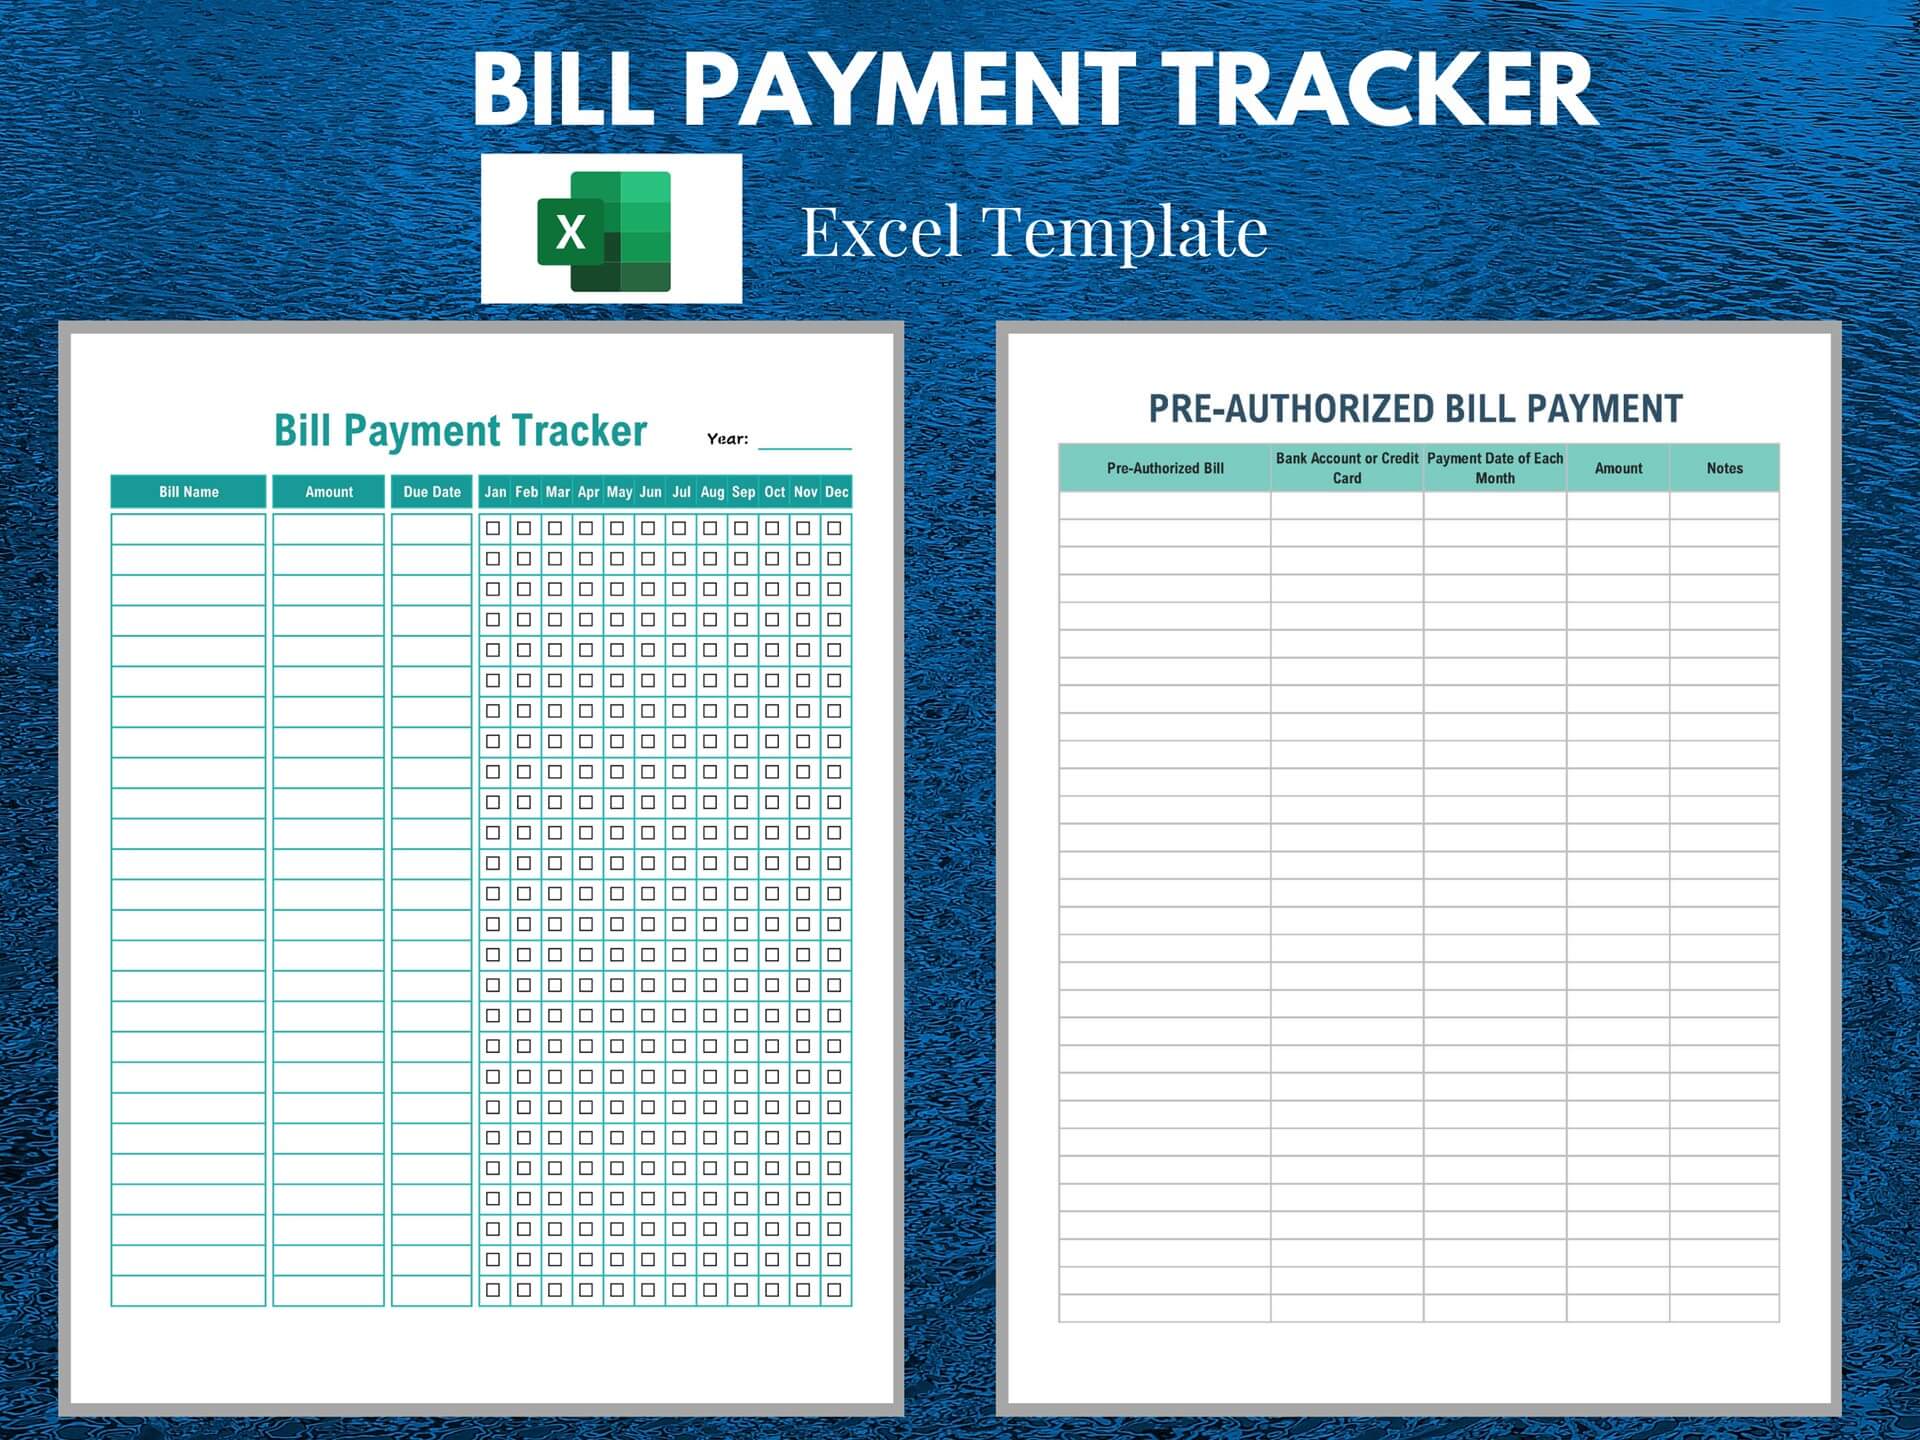 Dashboard Templates Bill Payment TrackerExcel and Editable PDF